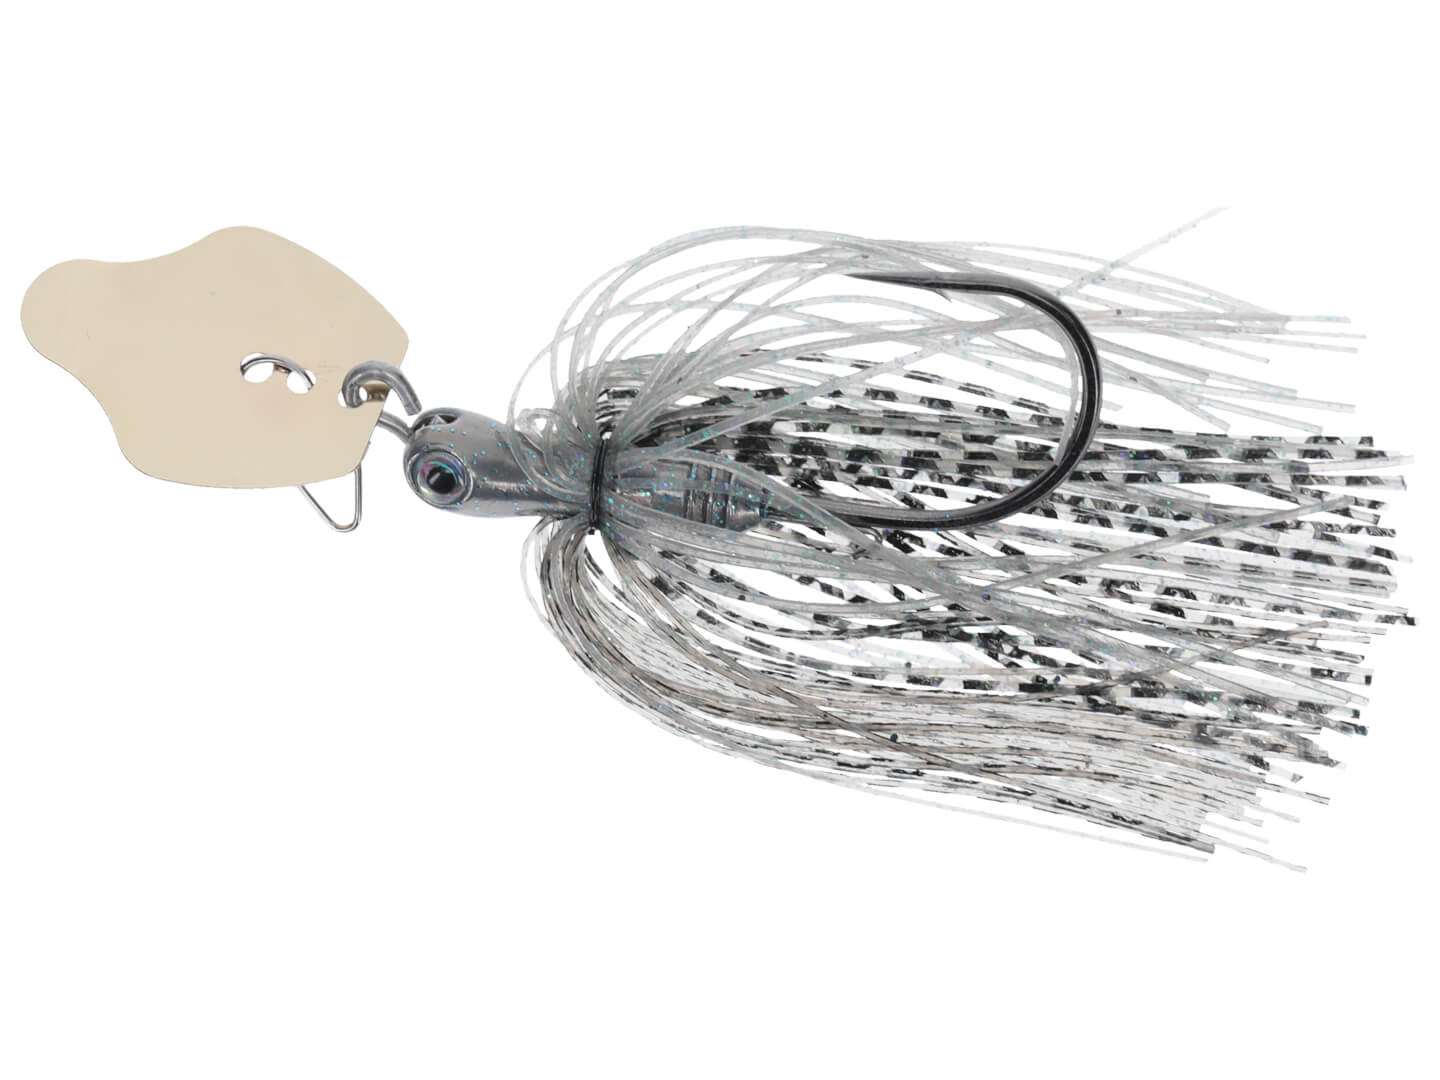 Tungsten Thunder Cricket Overview with Andy Montgomery [NEXT LEVEL]  In  heavily pressure fishing situations, smaller compact baits have helped many  anglers to generate bite. Andy Montgomery gives us an overview of